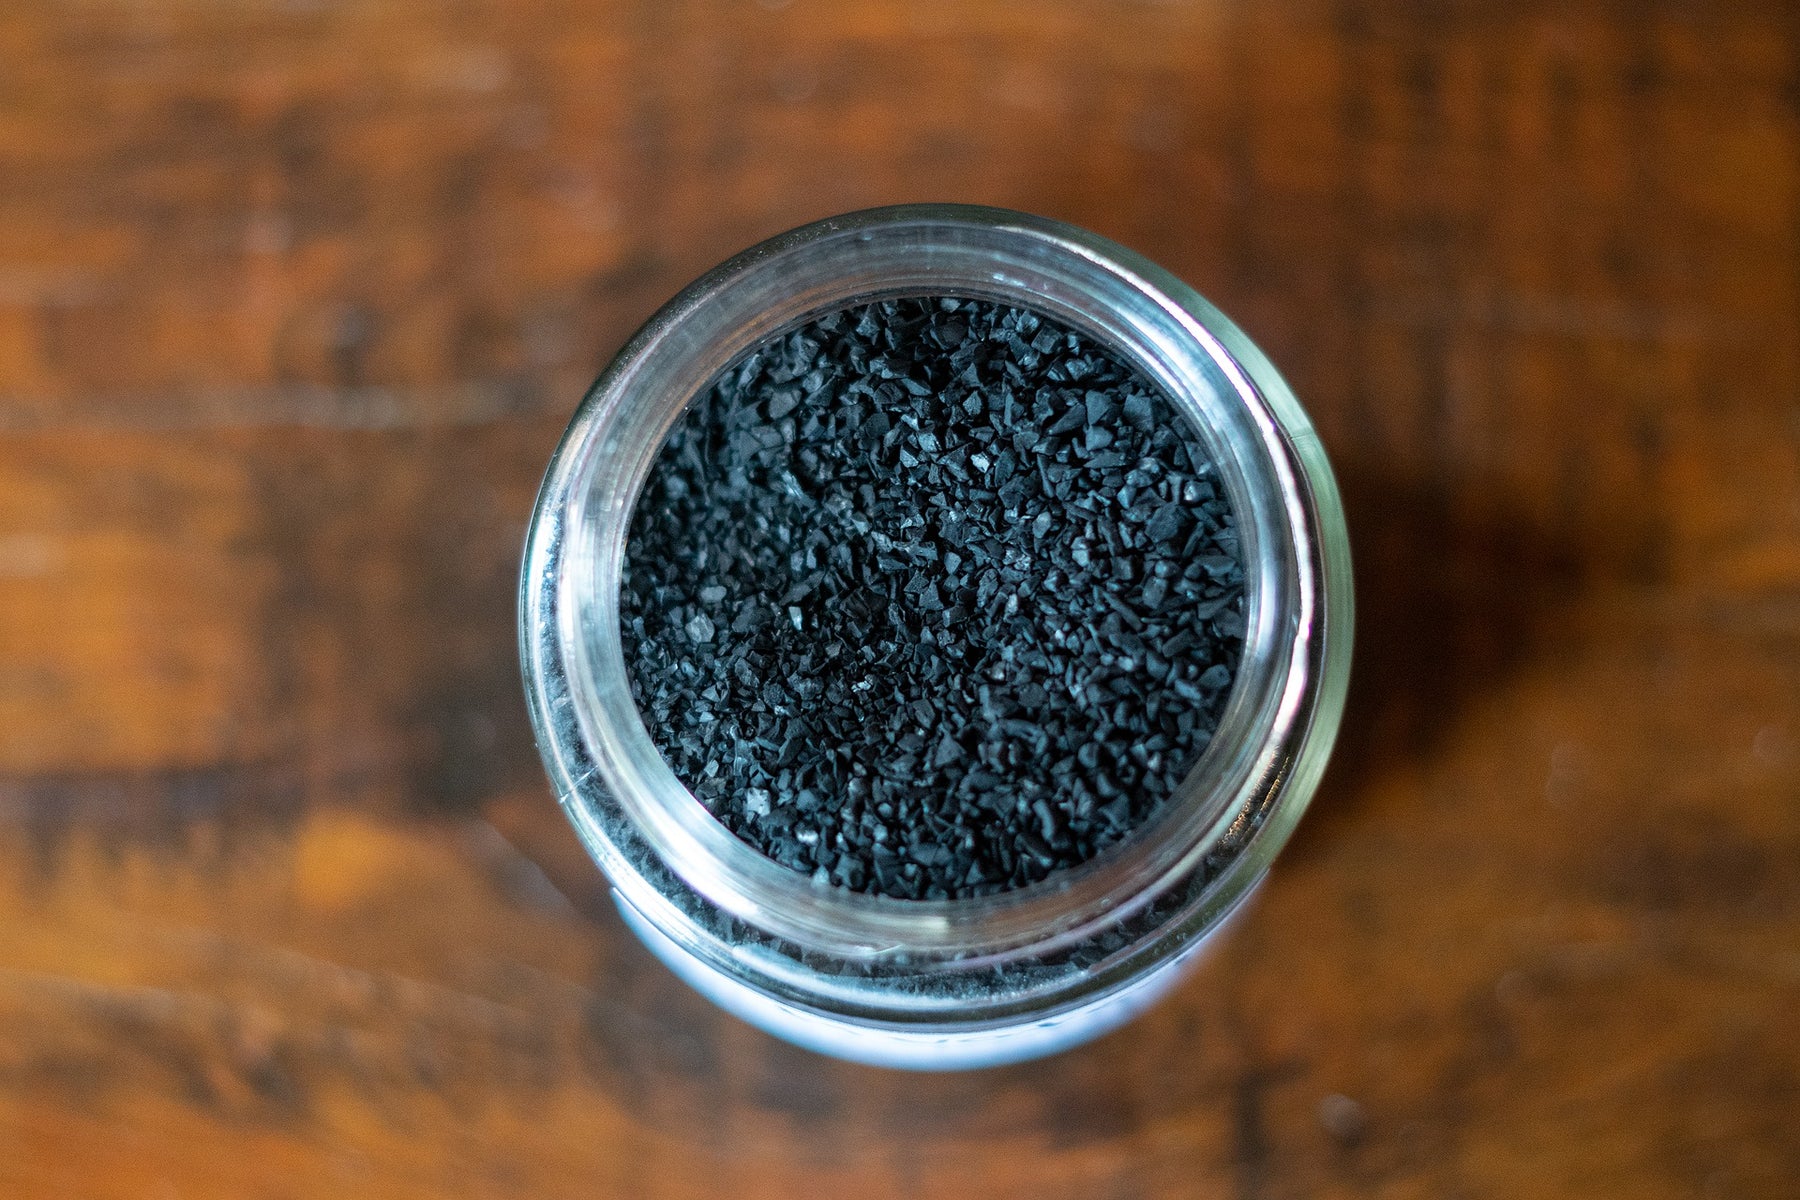 Activated Charcoal Benefits for Your Health, Beauty & Body